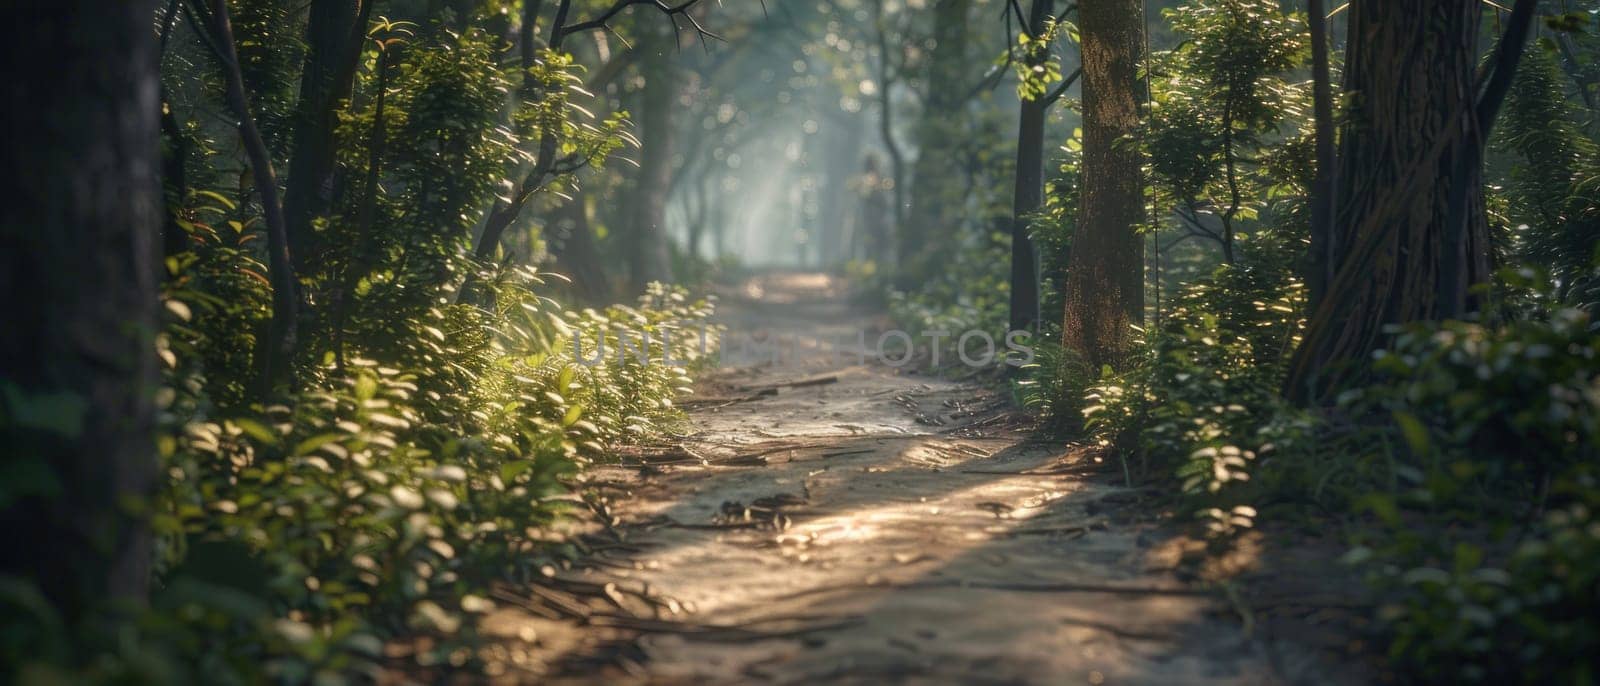 A forest path with a stone walkway by golfmerrymaker